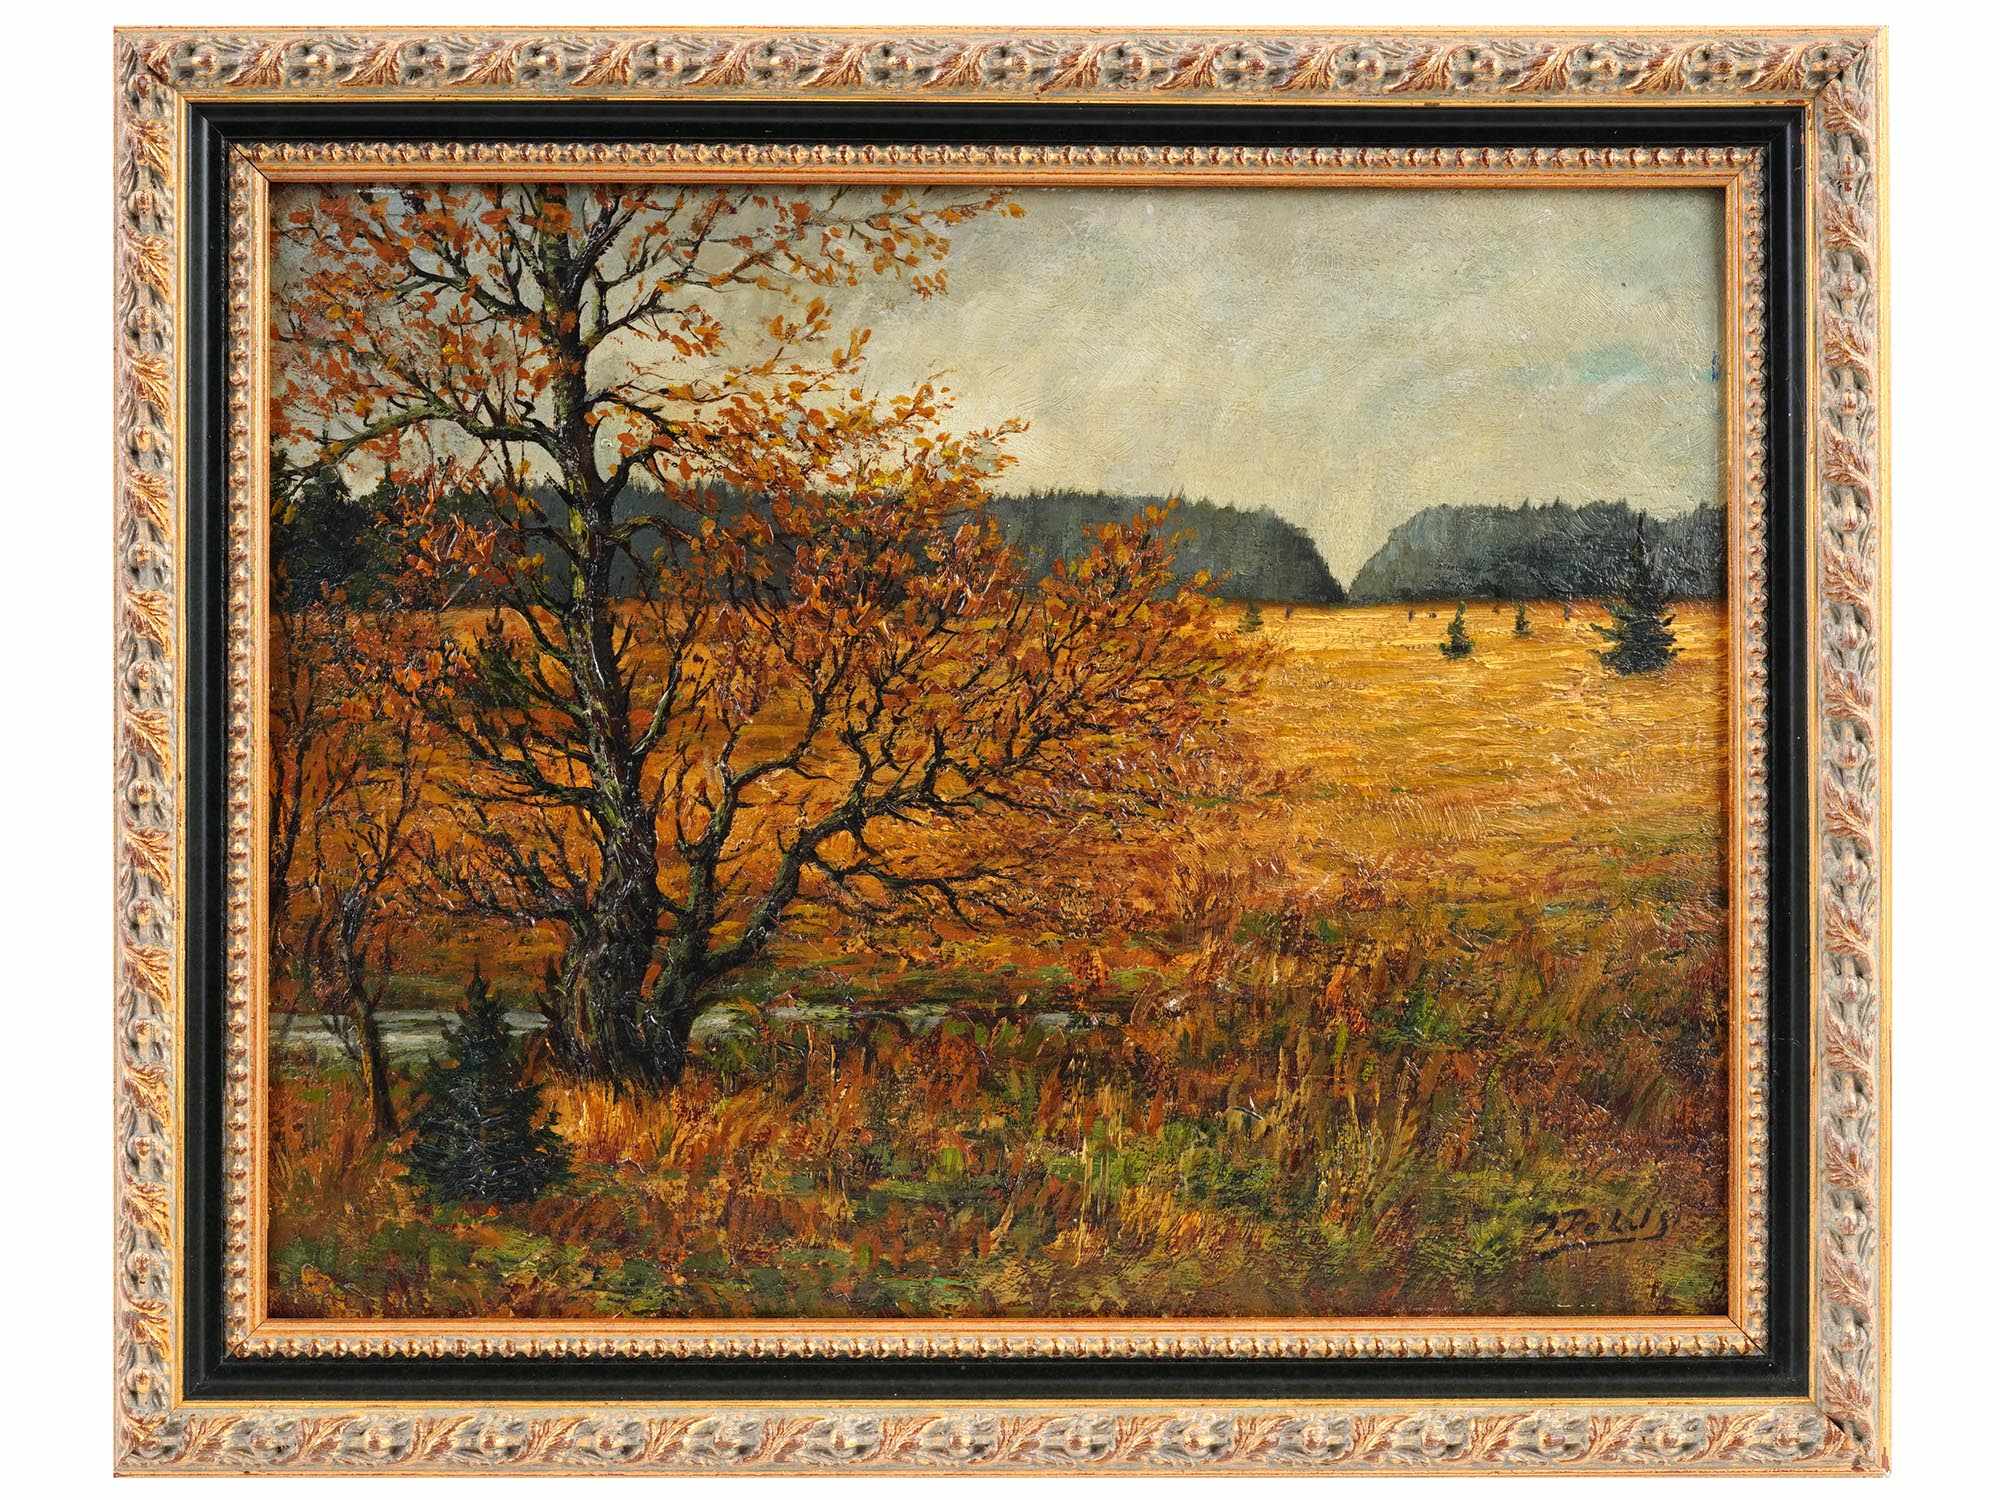 FALL LANDSCAPE OIL PAINTING BY JACQUELINE POLITIS PIC-0